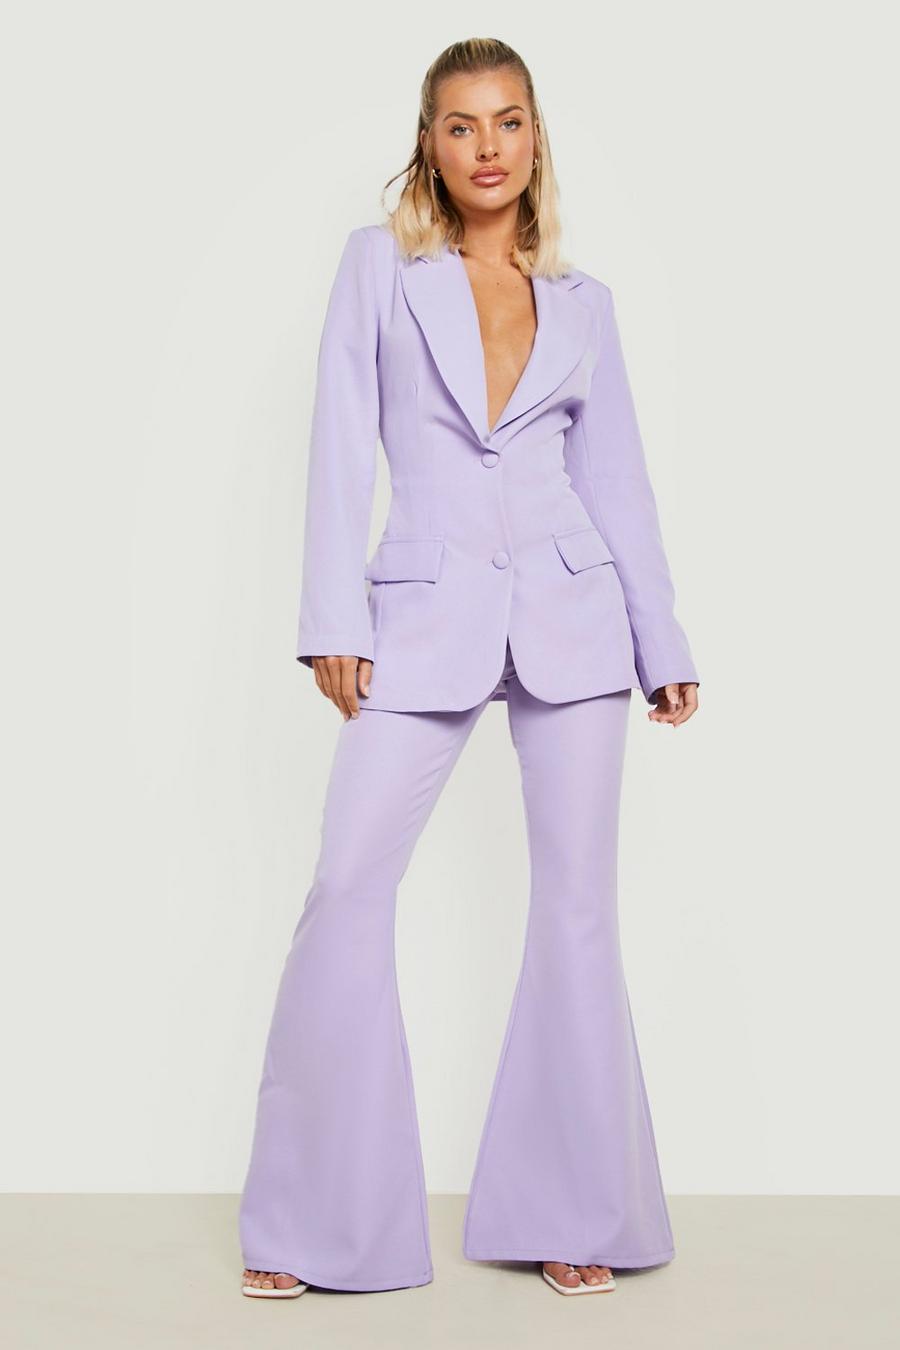 Lilac Lace Up Back Tailored Fitted Blazer image number 1